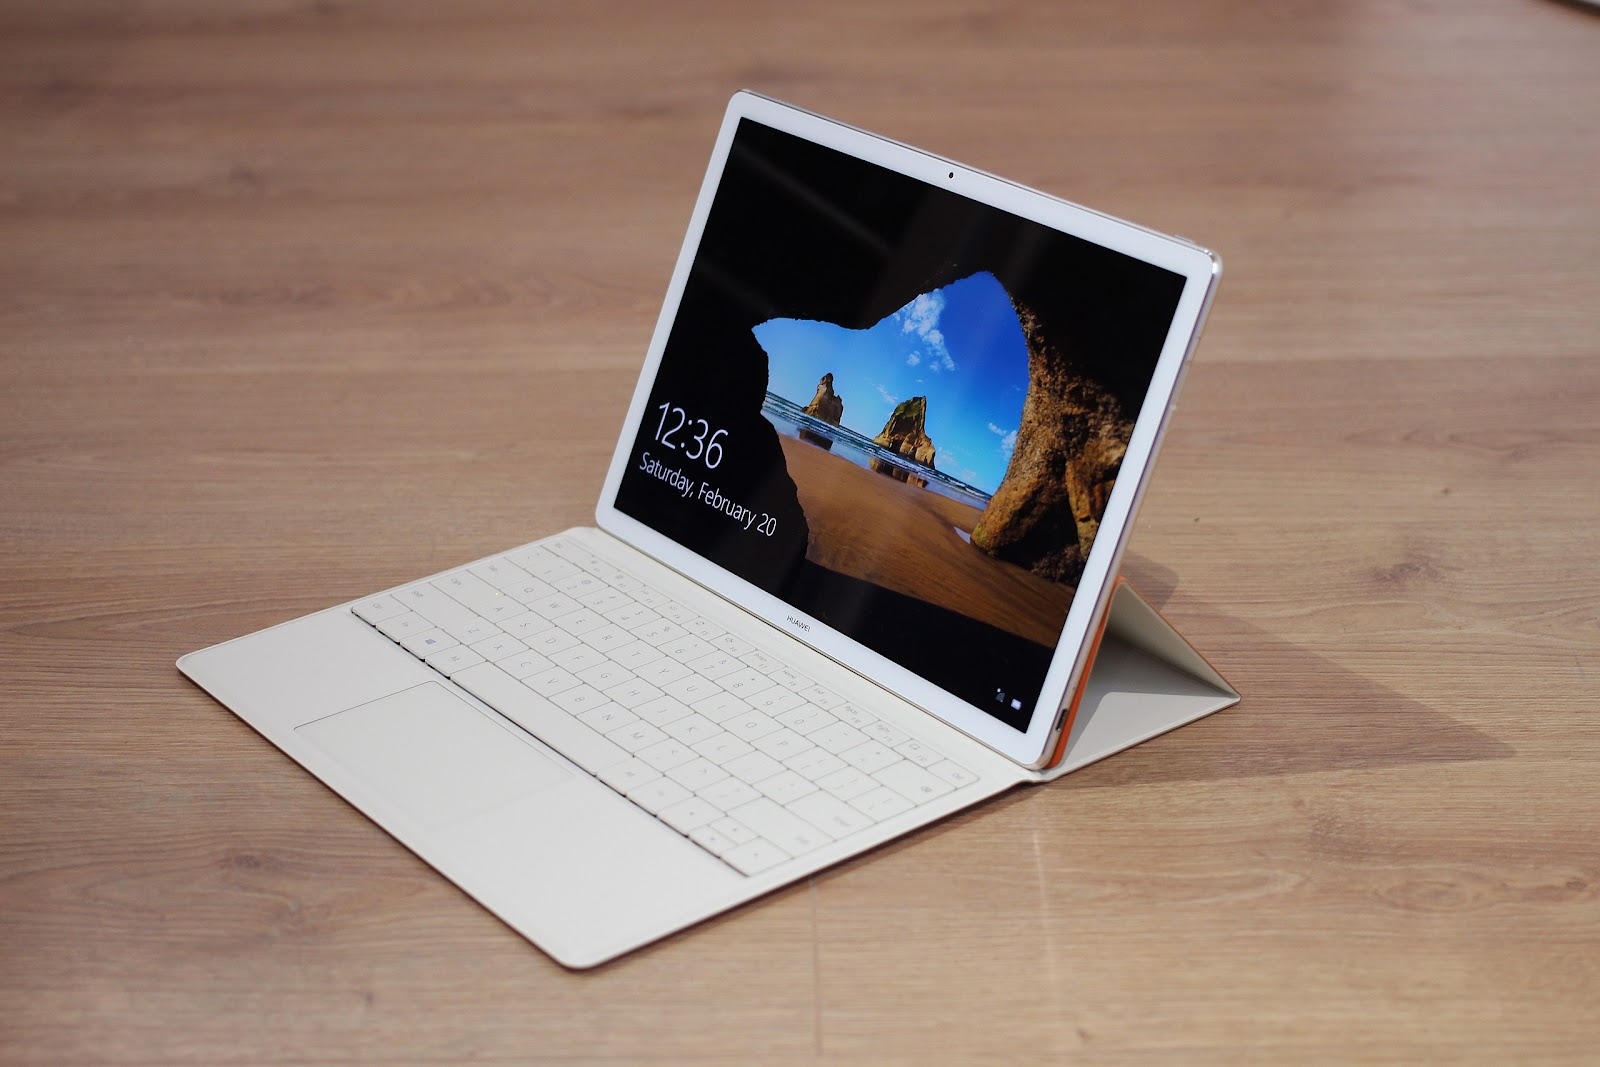 Microsoft Surface Go in the wooden desk in white color.